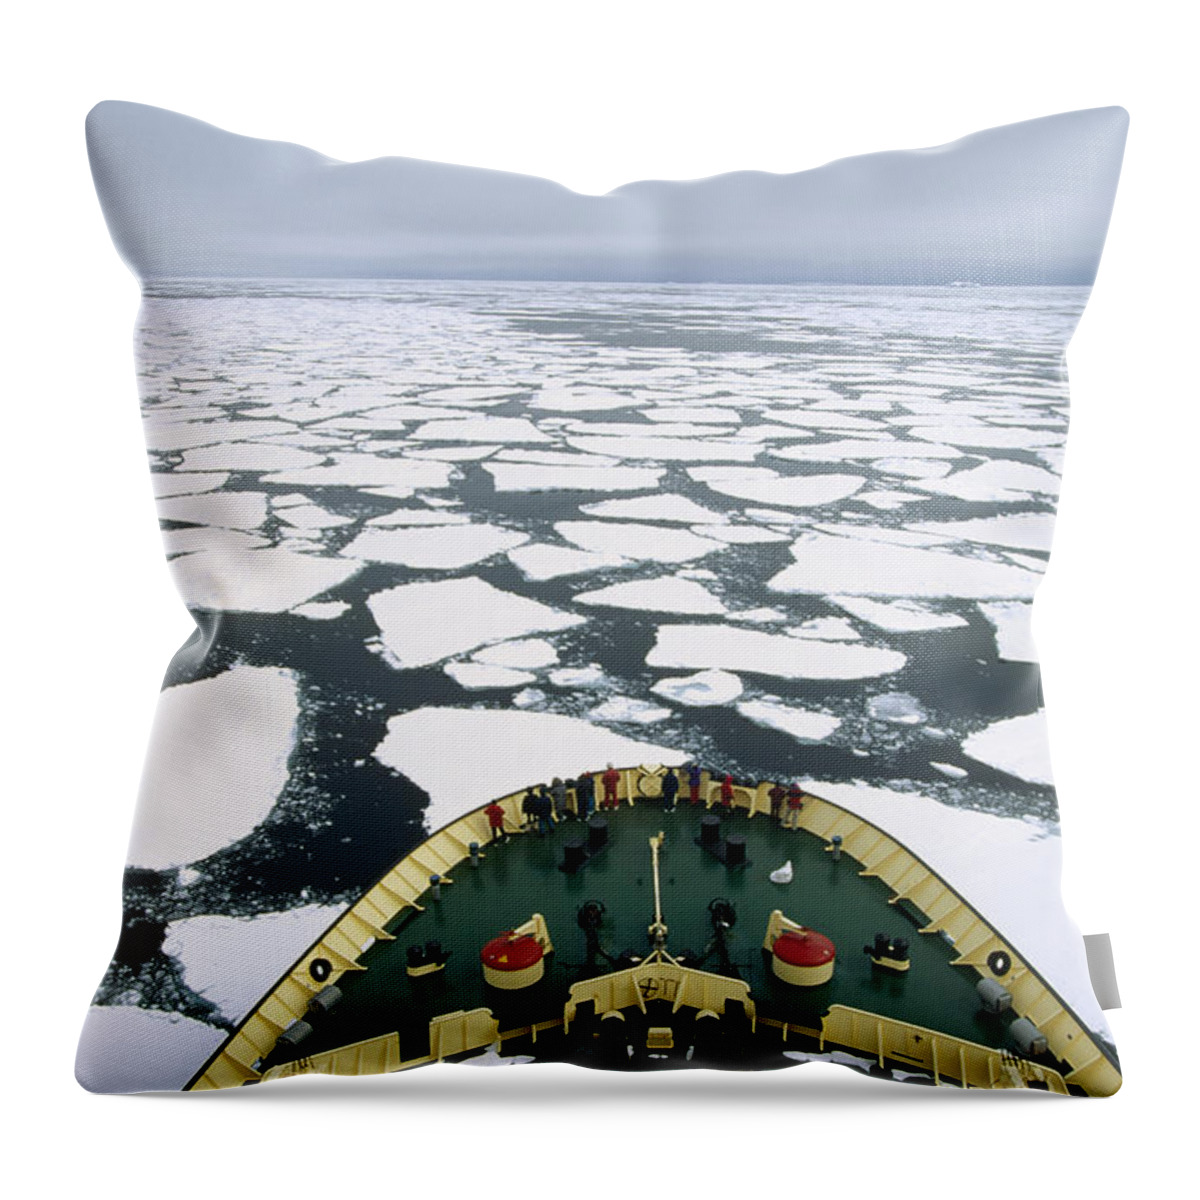 Feb0514 Throw Pillow featuring the photograph Tourists On Russian Icebreaker by Konrad Wothe